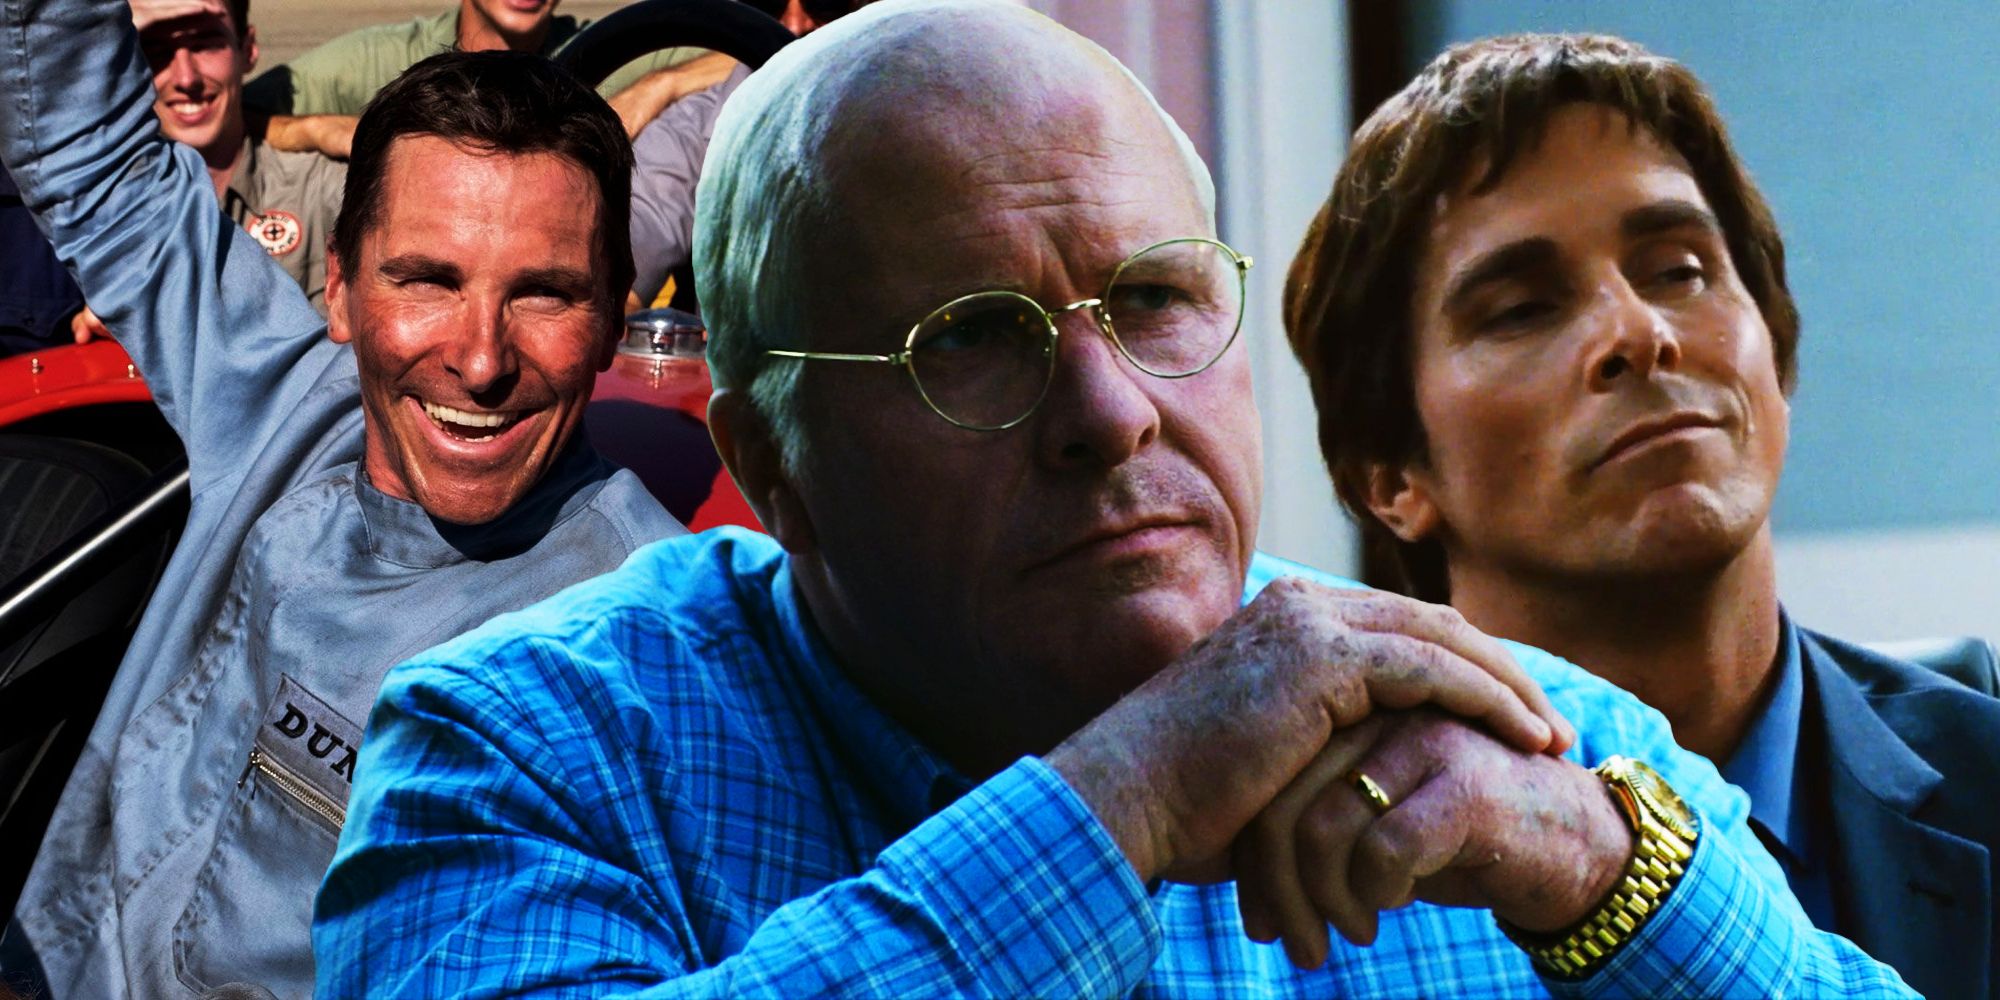 Christian Bale as real life characters Ken Miles, Dick Cheney, and Michael Burry